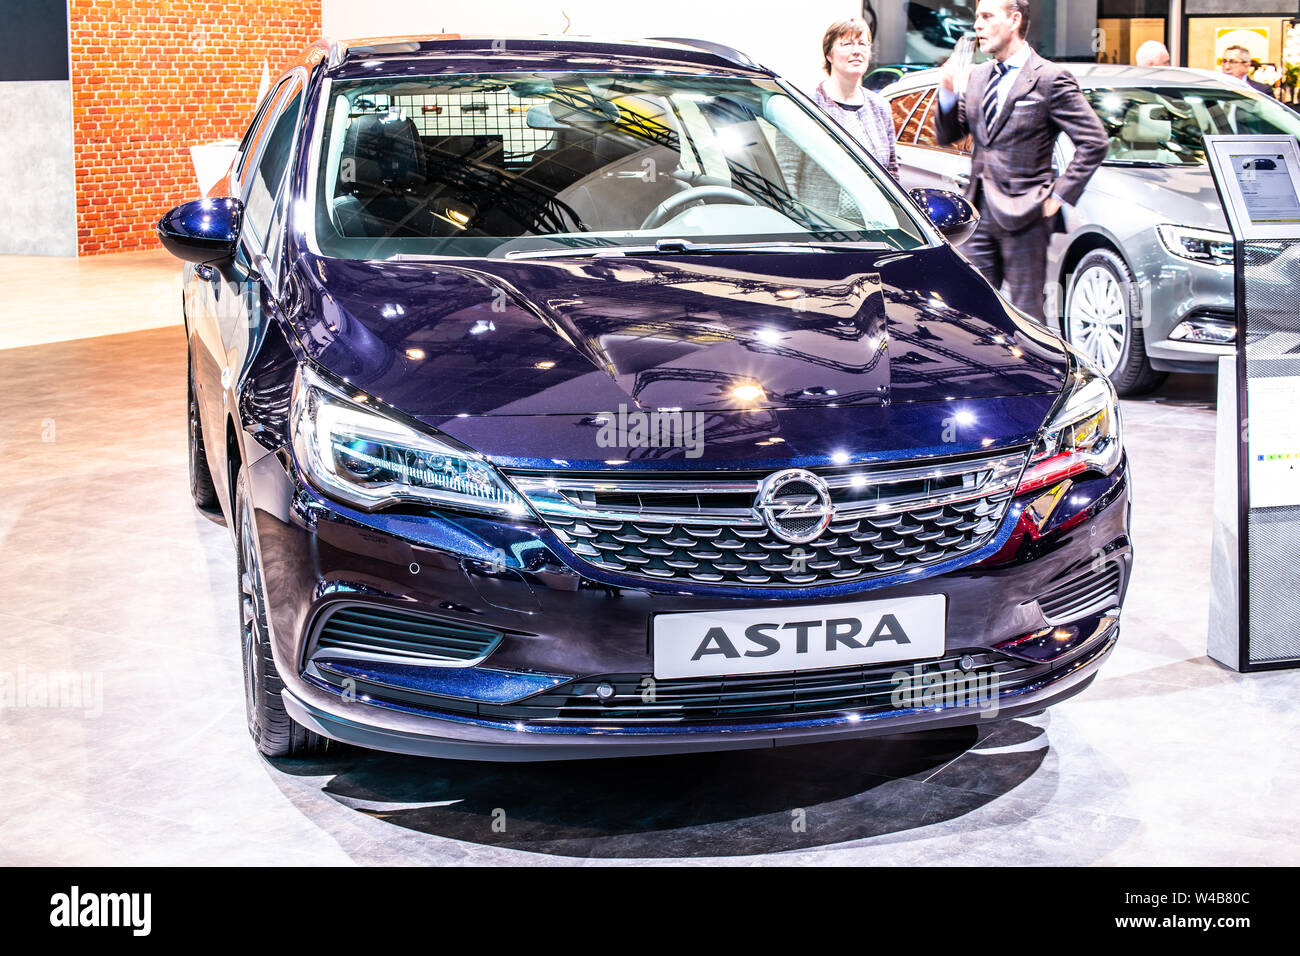 Brussels, Jan 2019: OPEL ASTRA SPORTS TOURER, Brussels Motor Show, 5th gen Astra  K, D2XX platform, small family car produced by Opel (PSA Group Stock Photo  - Alamy